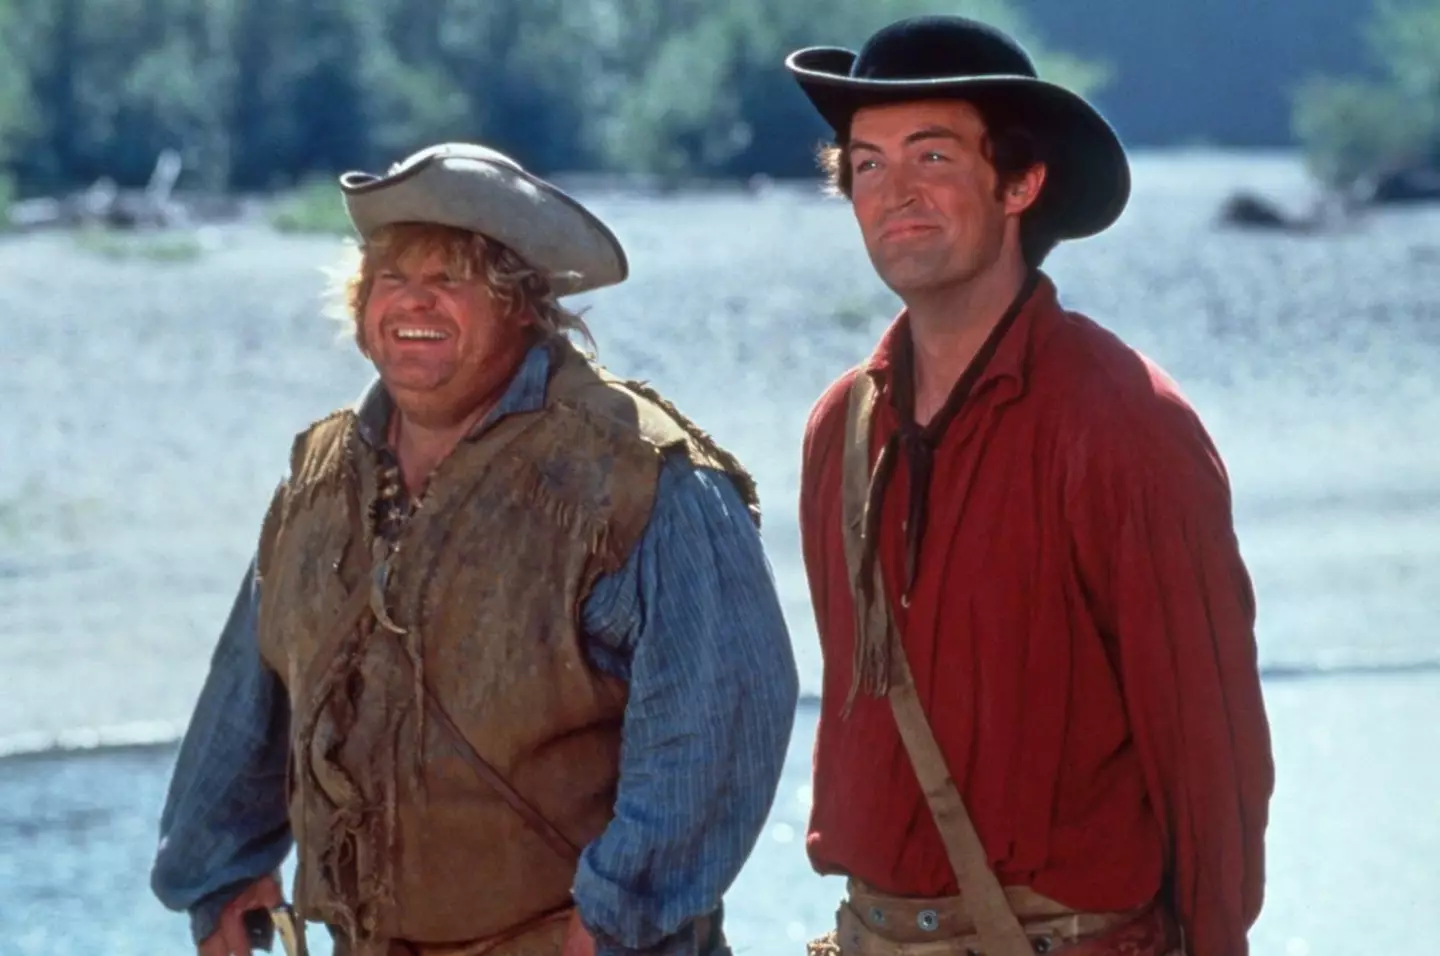 Perry and Farley were both starring in Western comedy Almost Heroes.